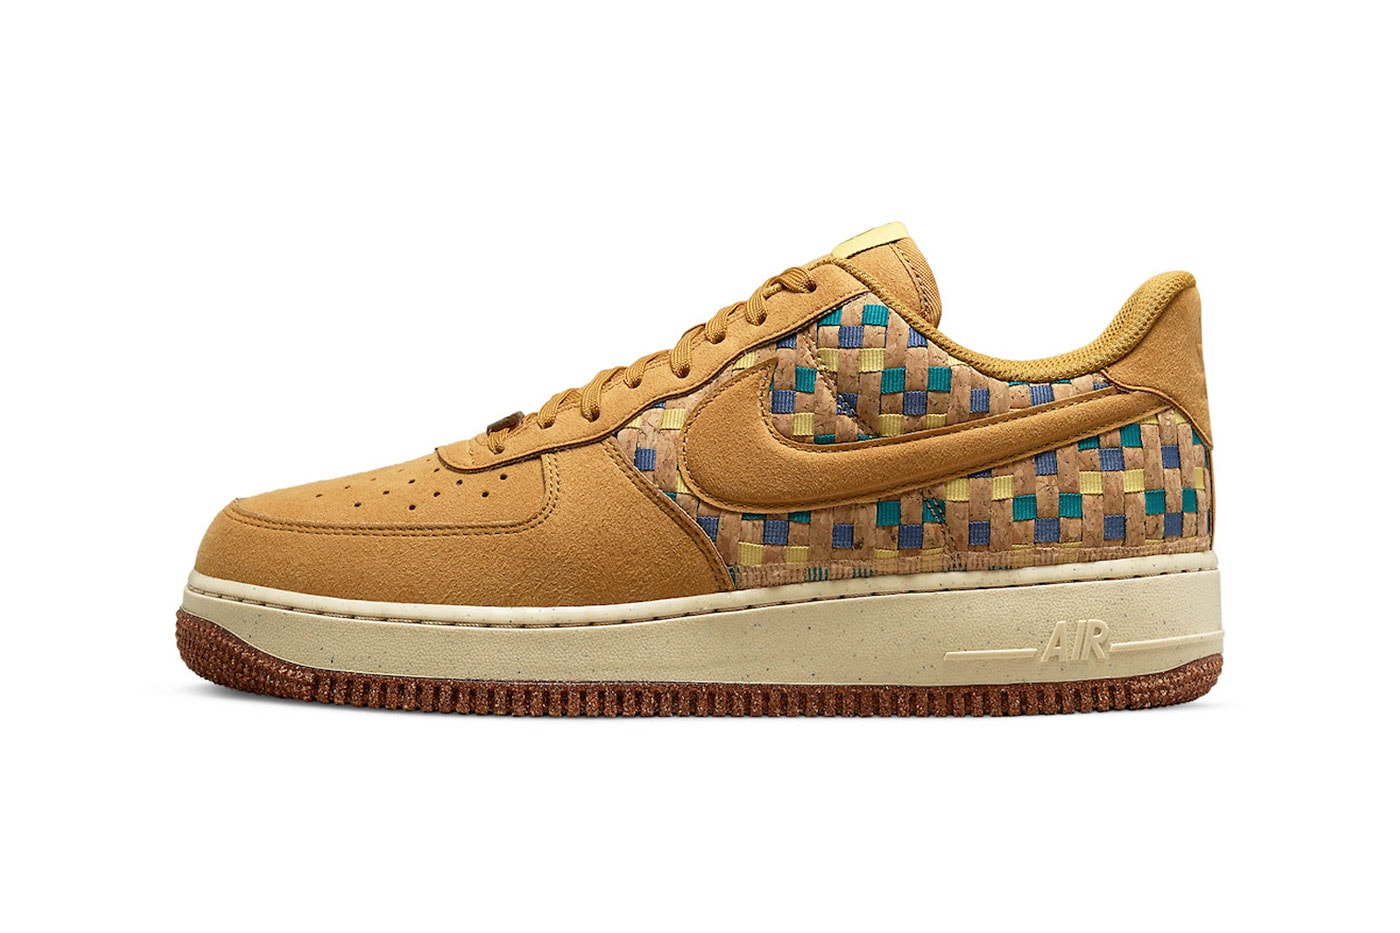 Here Are the Official Images of the Nike Air Force 1 N7 "Woven Cork" DM4956-700 nike air force 1 low shows footwear sneakers af1s af1 